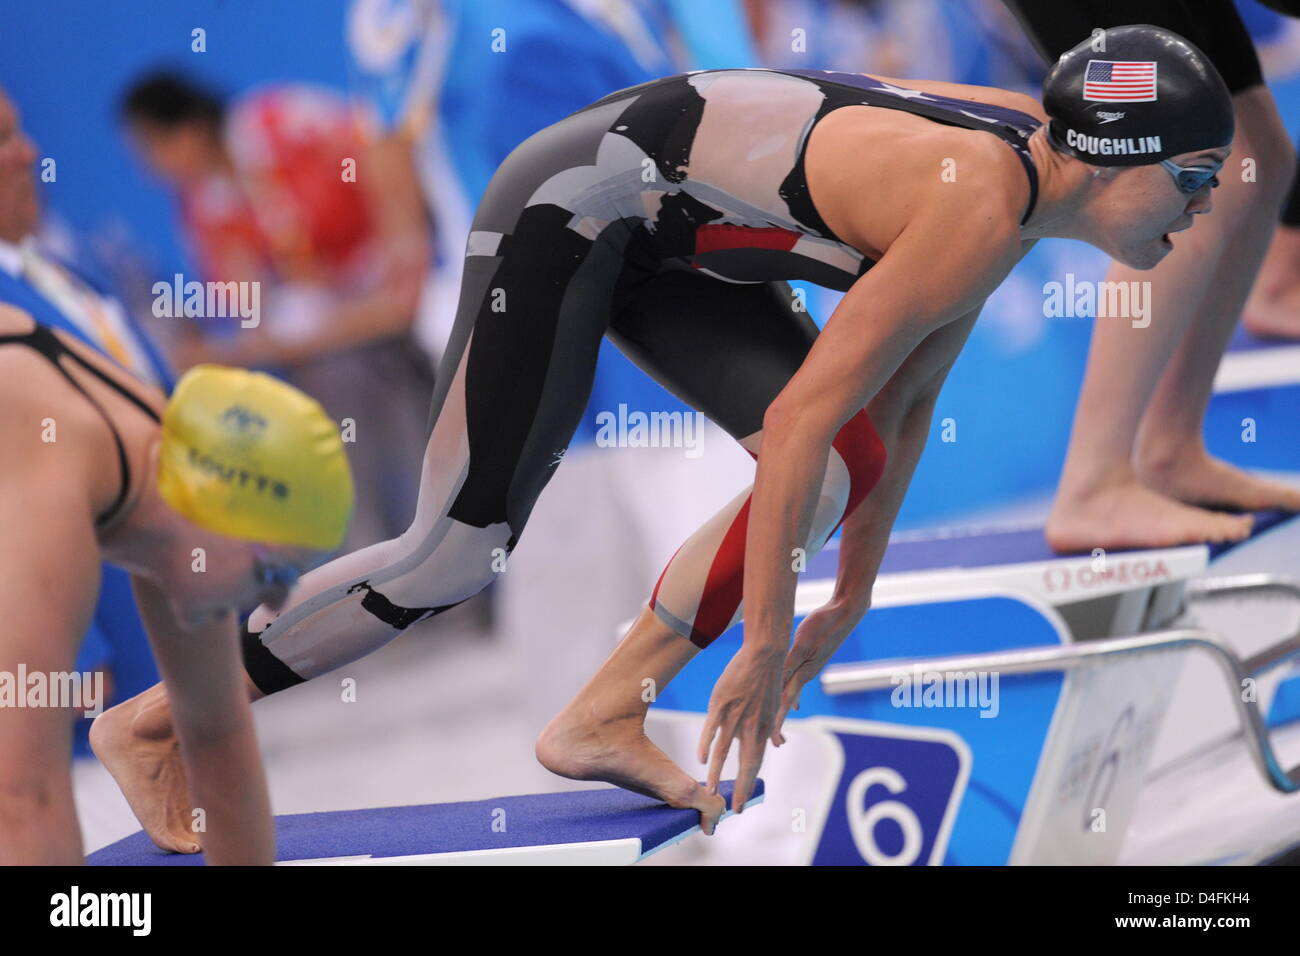 US swimmer Natalie Coughlin starts in the women's 200m individual medley semifinal during the 2008 Beijing Olympics swimming finals at the National Aquatics Center in Beijing, China, 12 August 2008. Photo: Bernd Thissen dpa ###dpa### Stock Photo